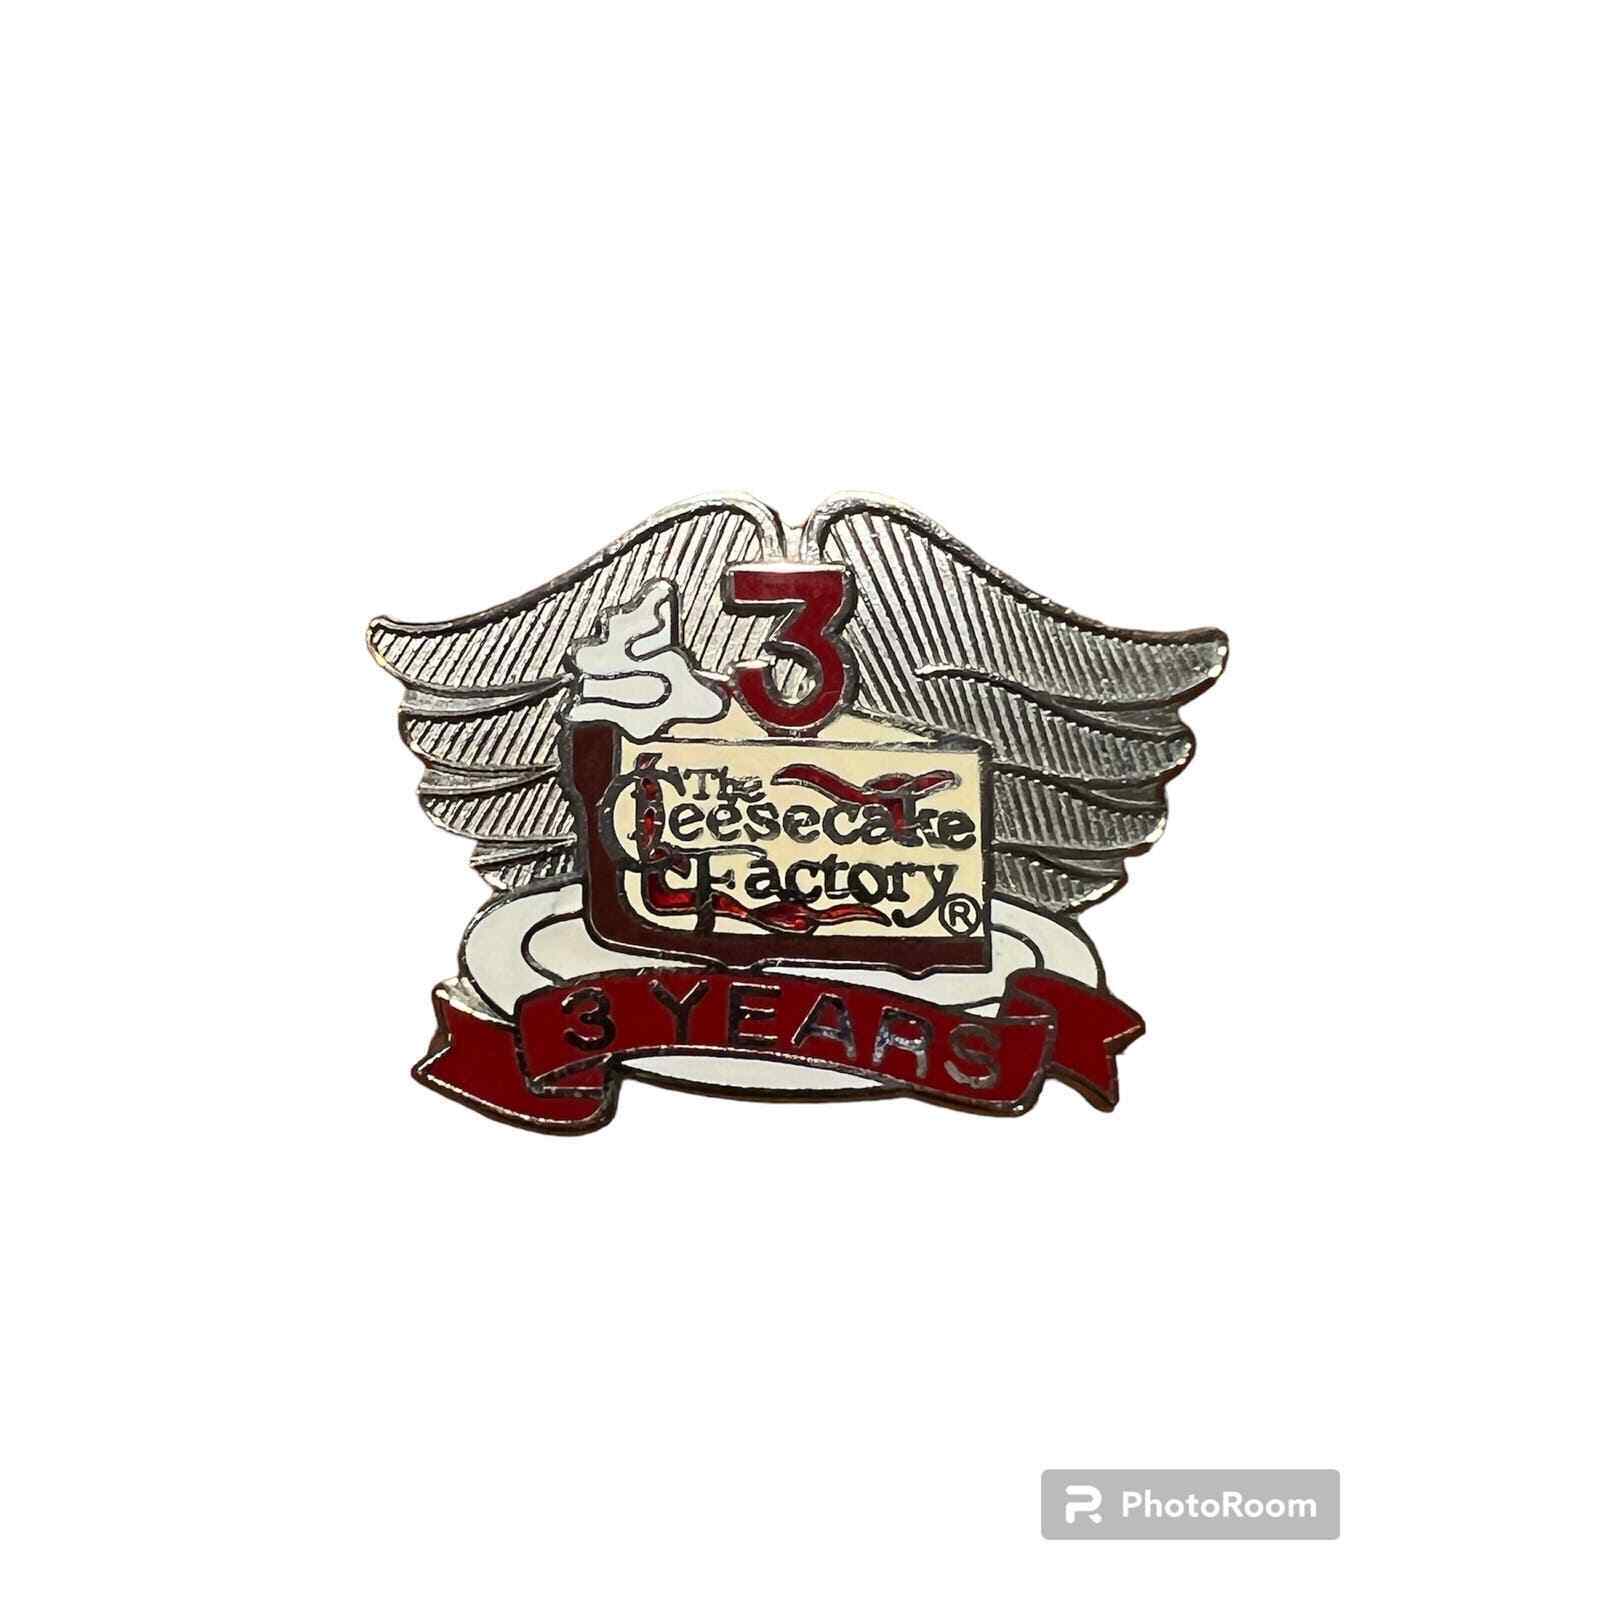 The Cheesecake Factory 3 Years Anniversary Employee Server Pin Silver Wings 